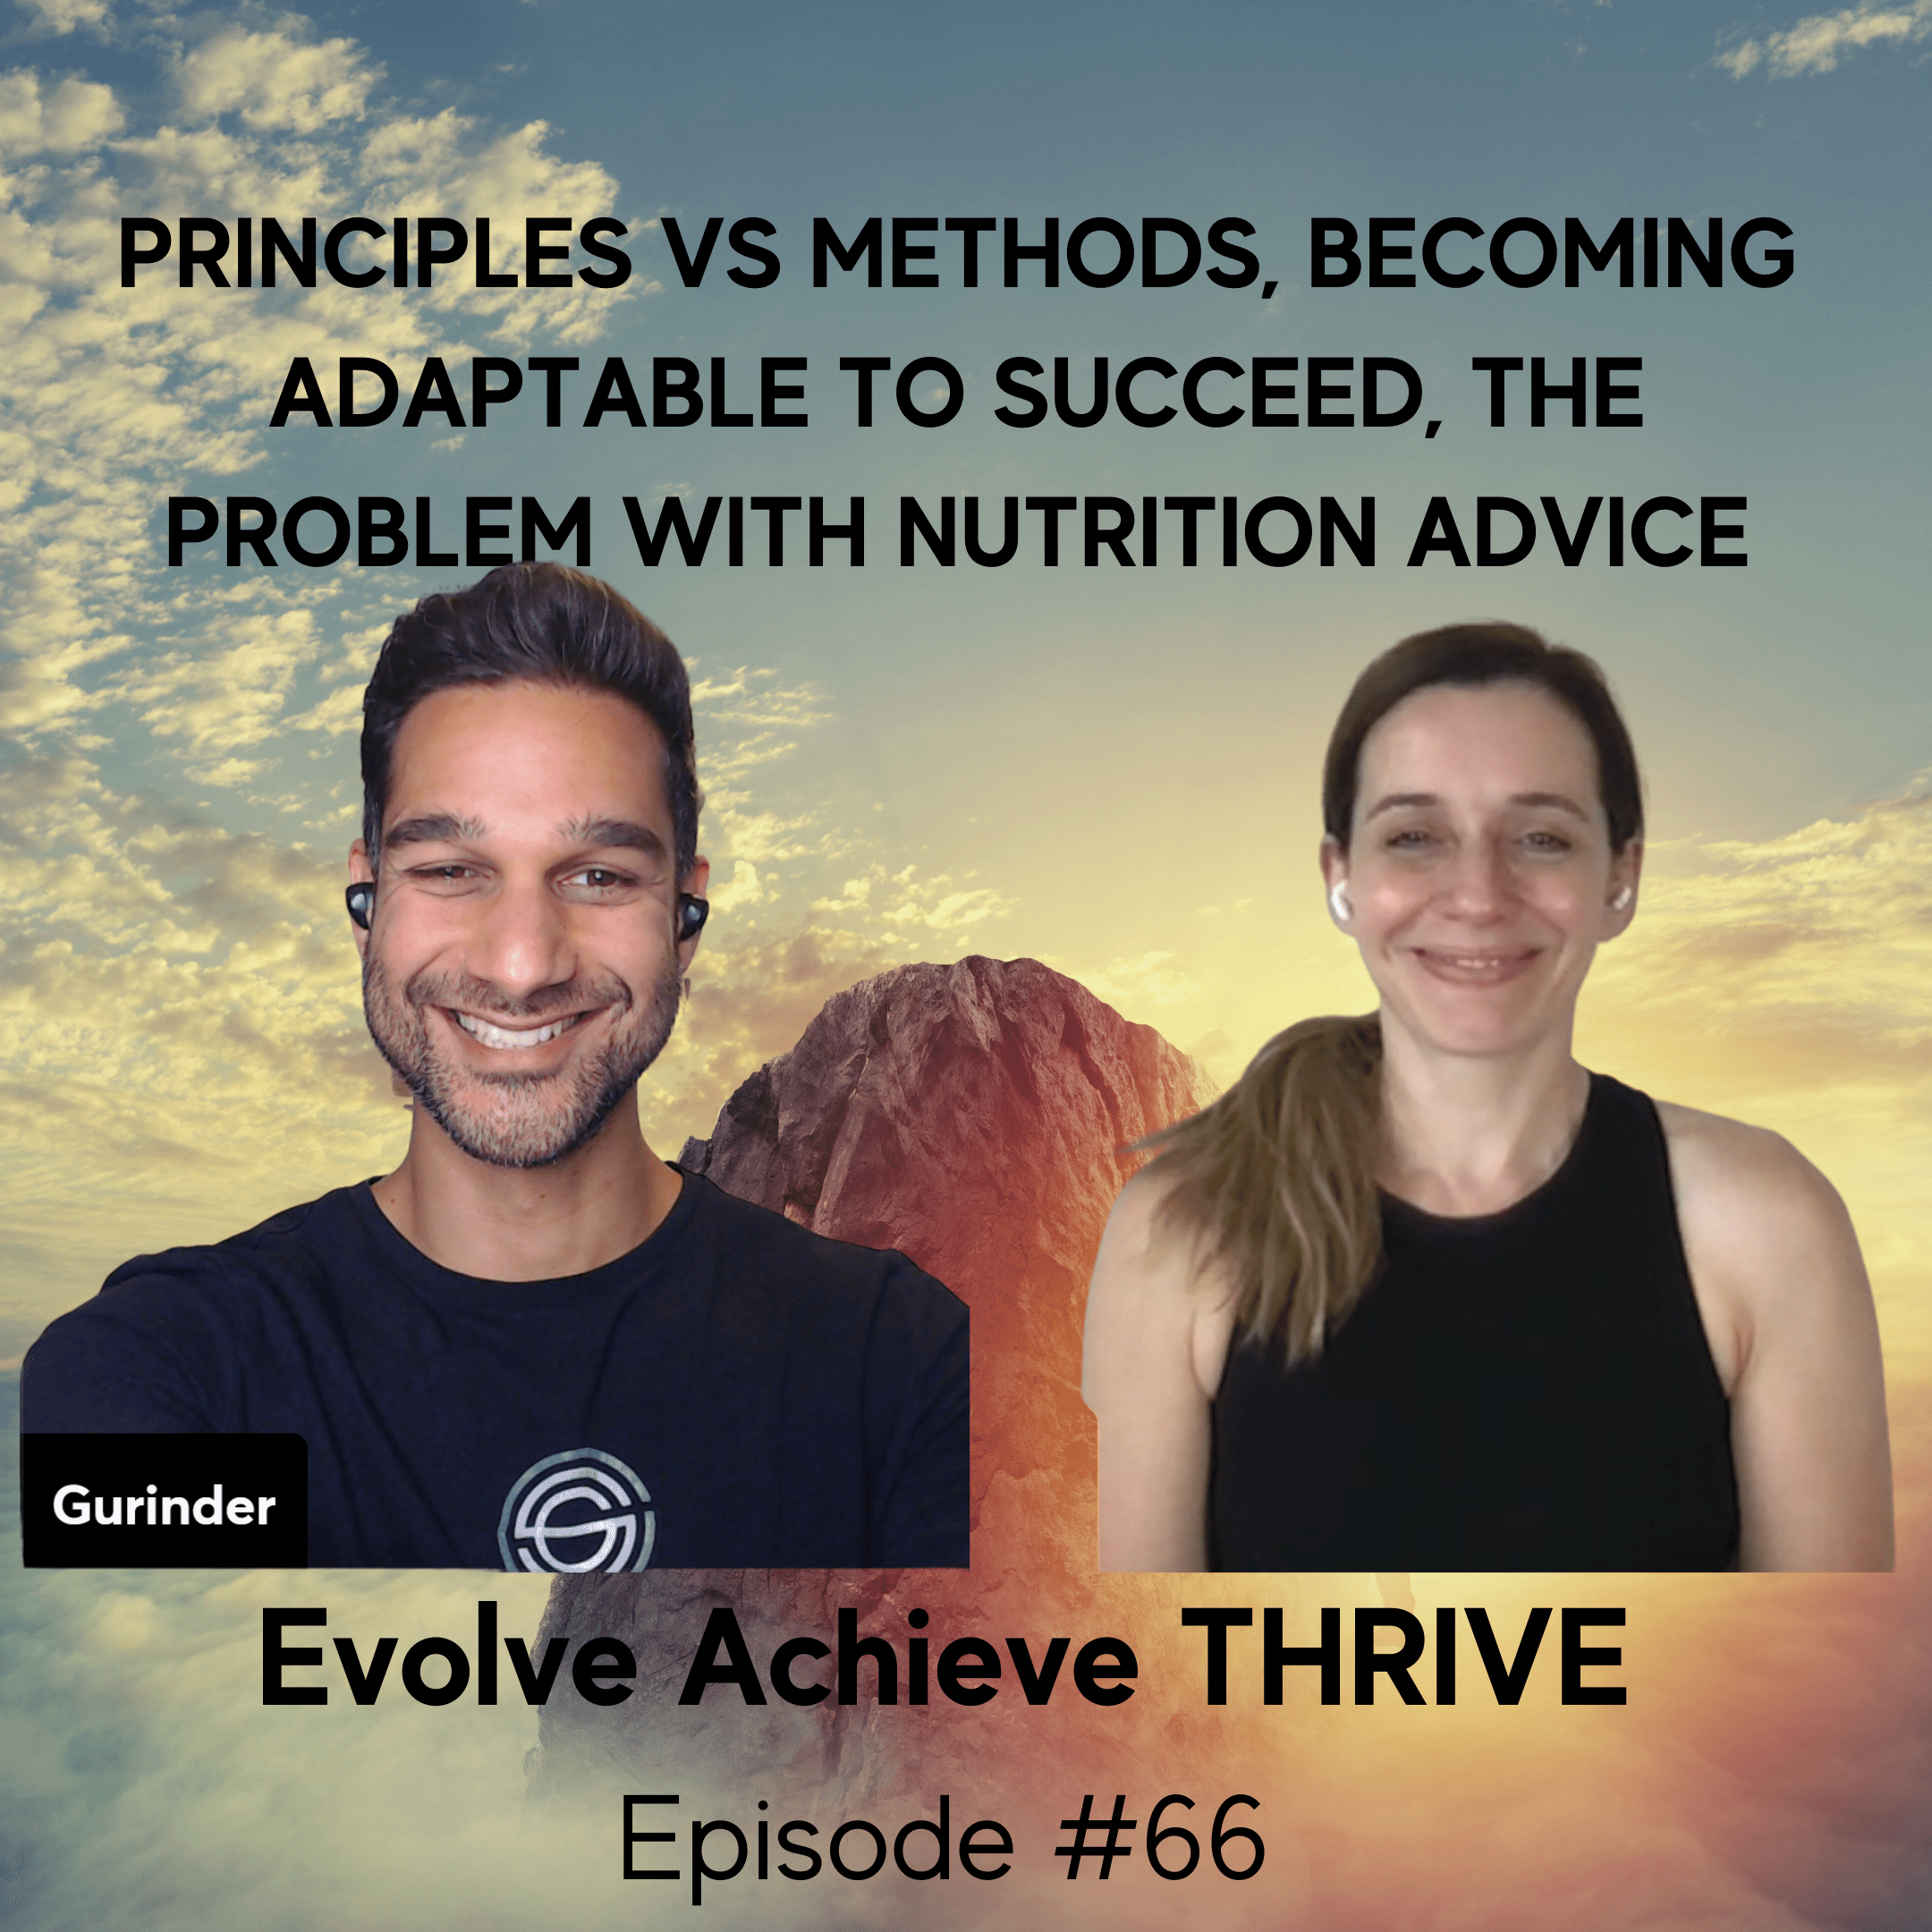 #66 Principles vs Methods, Becoming Adaptable to Succeed, The Problem with Nutrition Advice